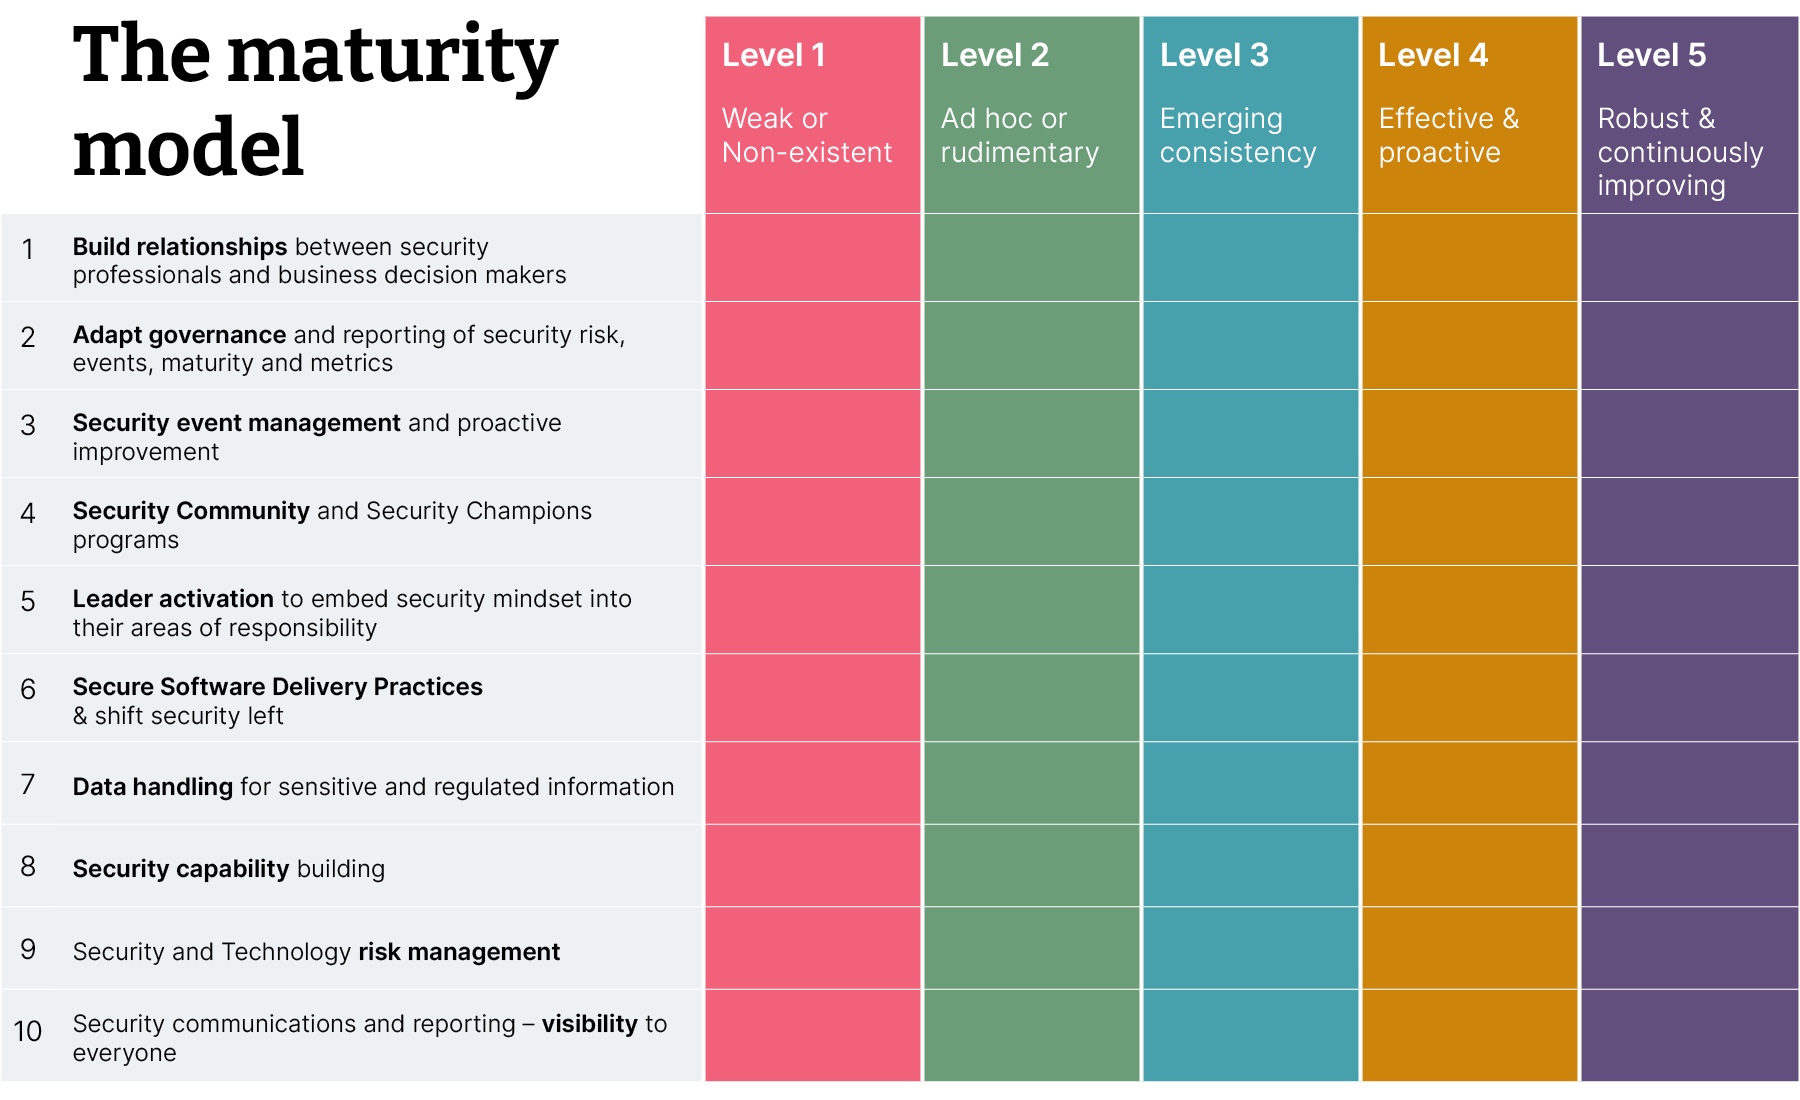 IMG: Thoughtworks business security maturity model showing its ten dimensions and five maturity levels